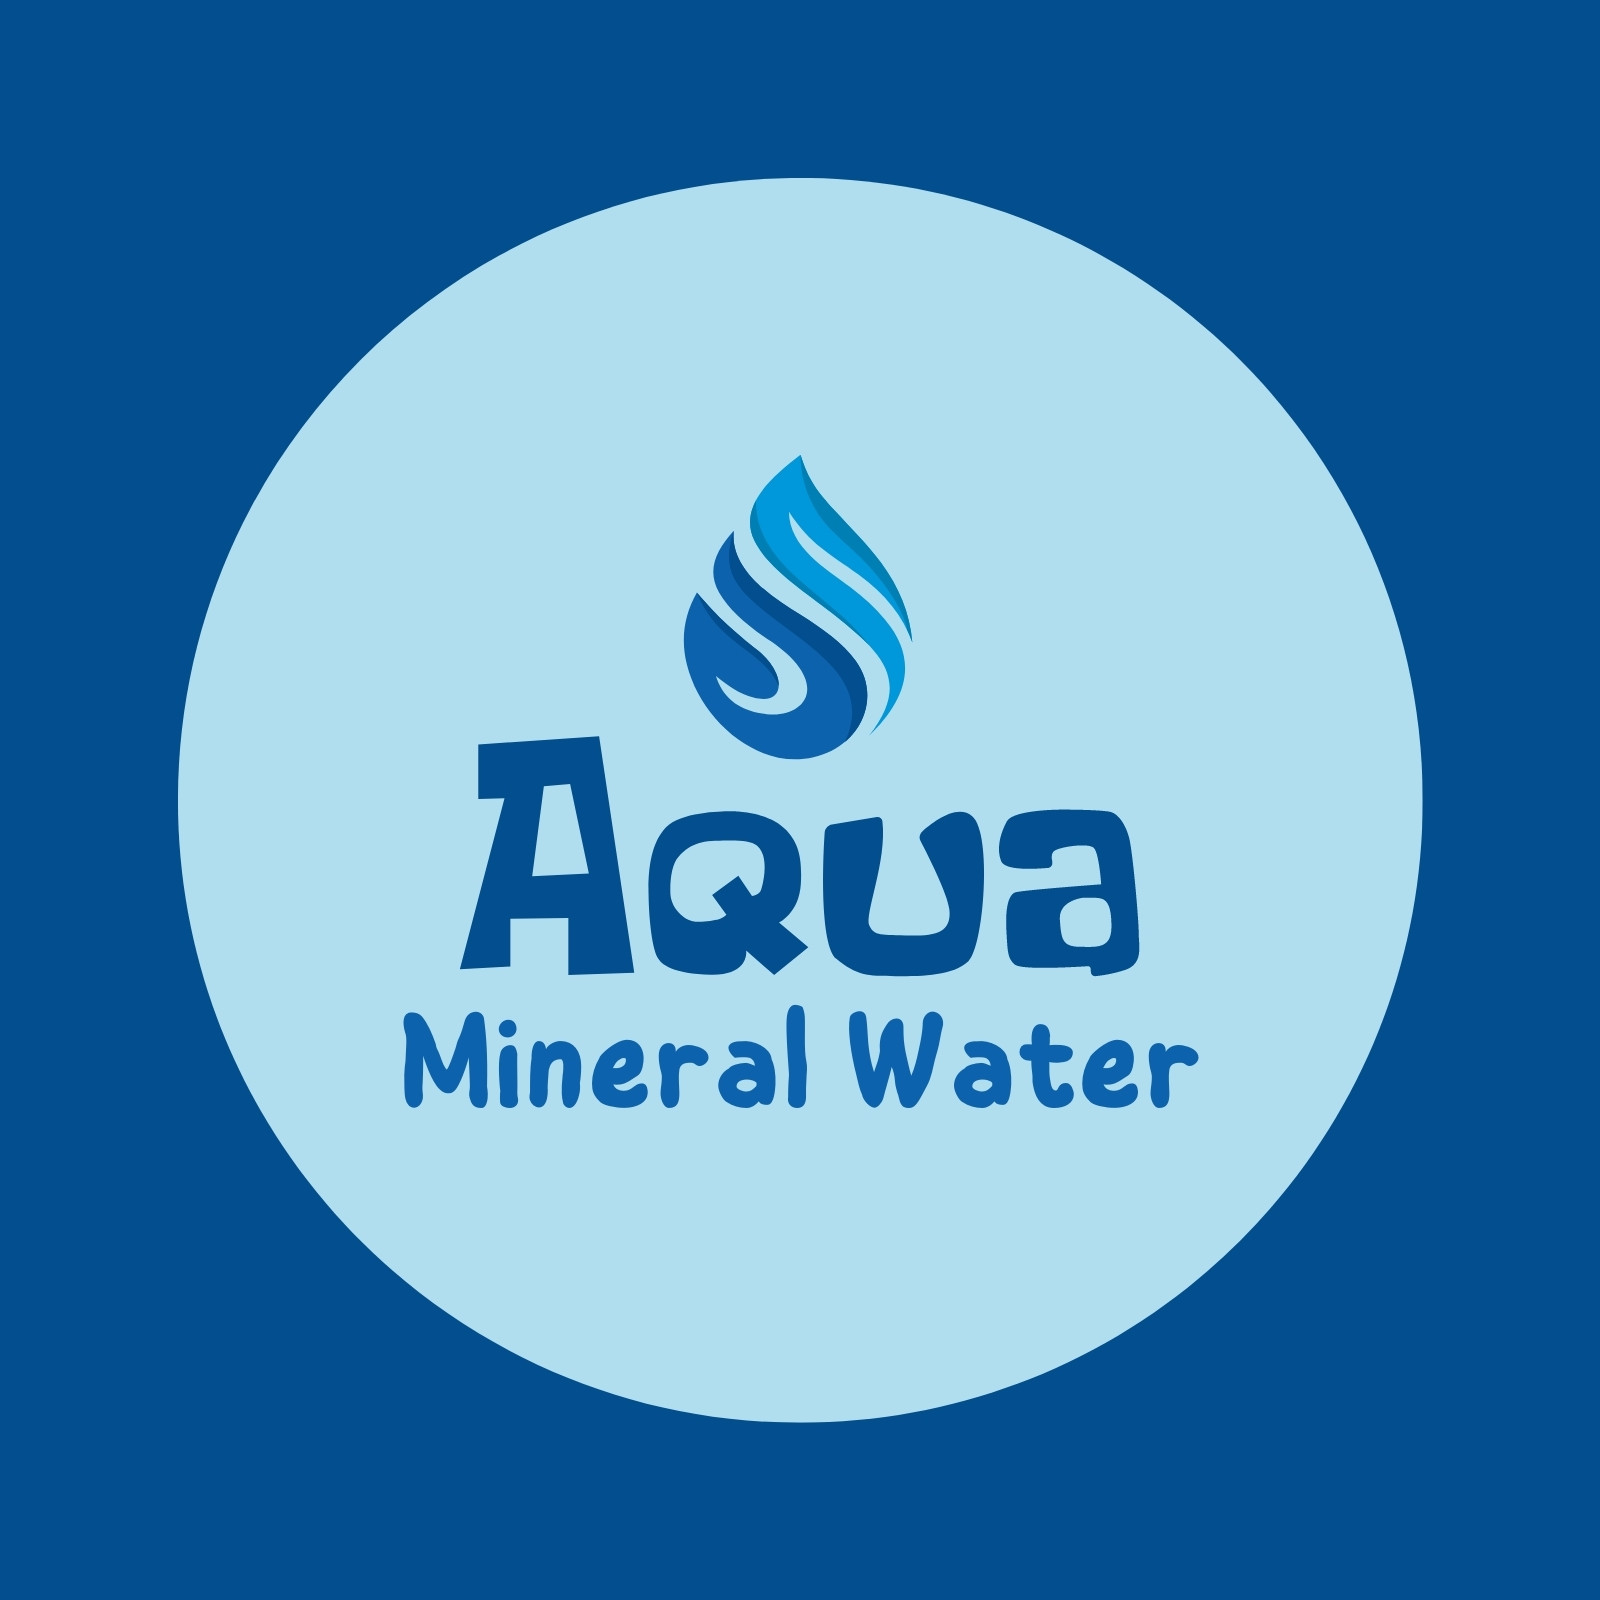 Aggregate 146+ water purifier logo latest